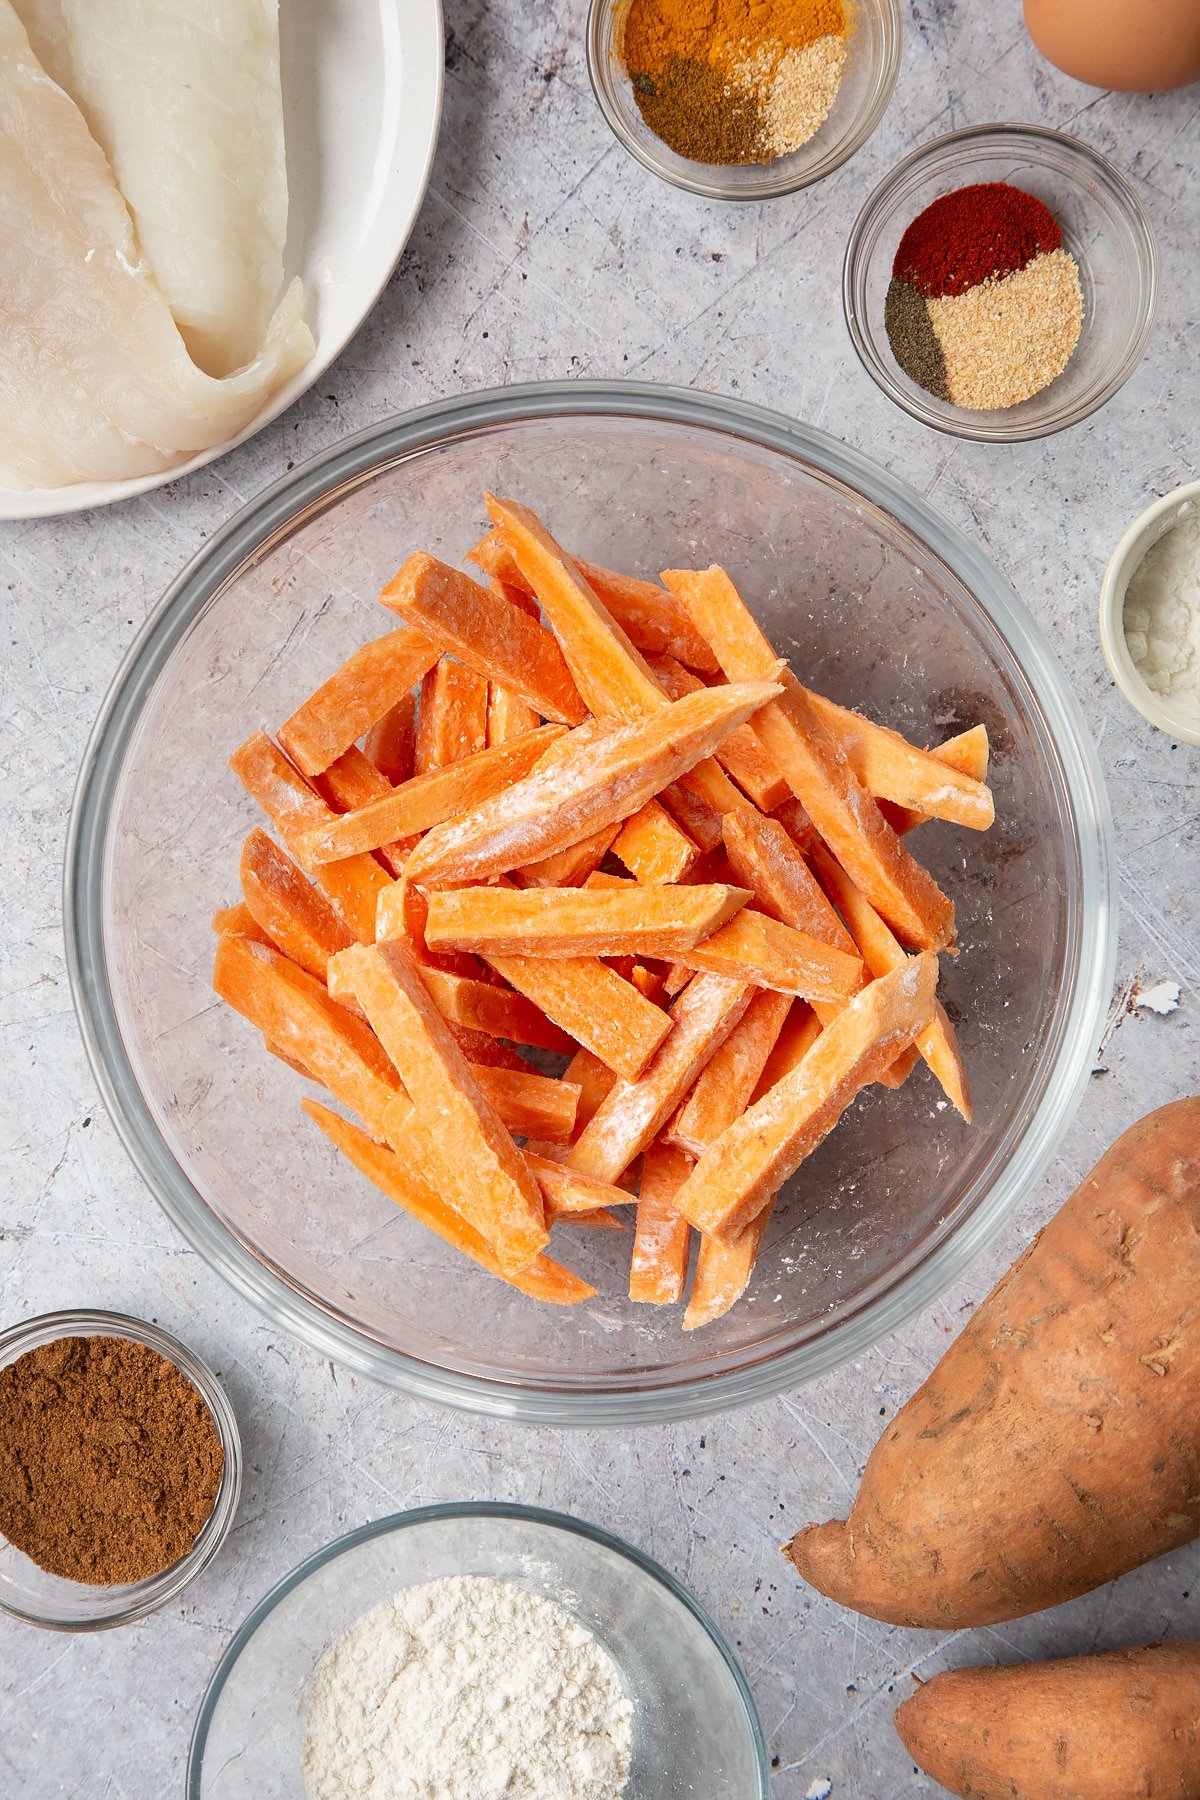 Sweet potato cut into fries and tossed in cornflour in a glass bowl. Surrounding the bowl is ingredients for sweet potato chips.